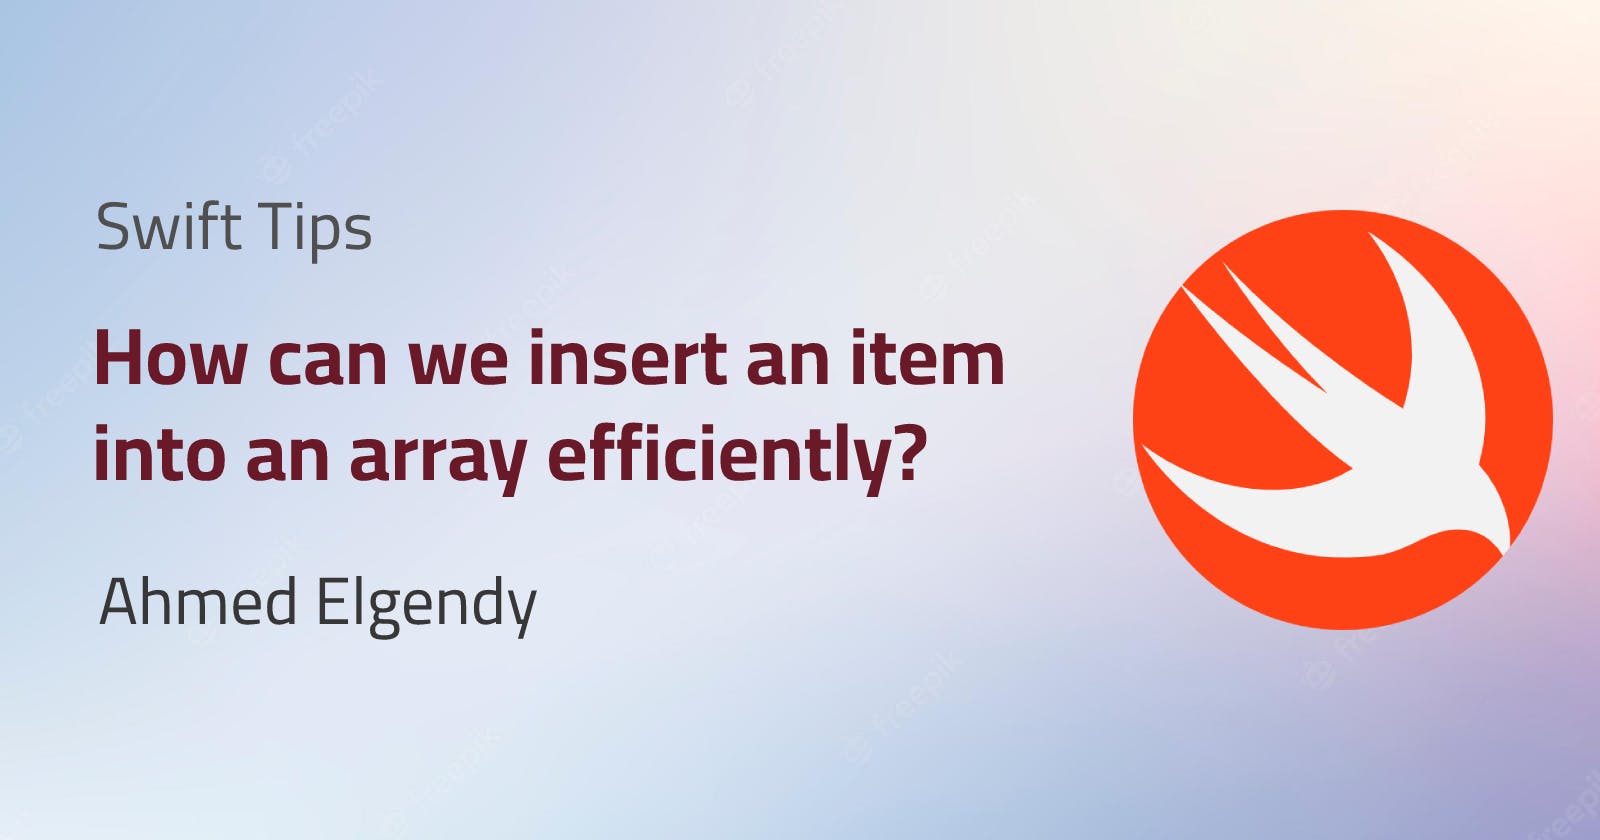 How can we insert an item into an array efficiently?